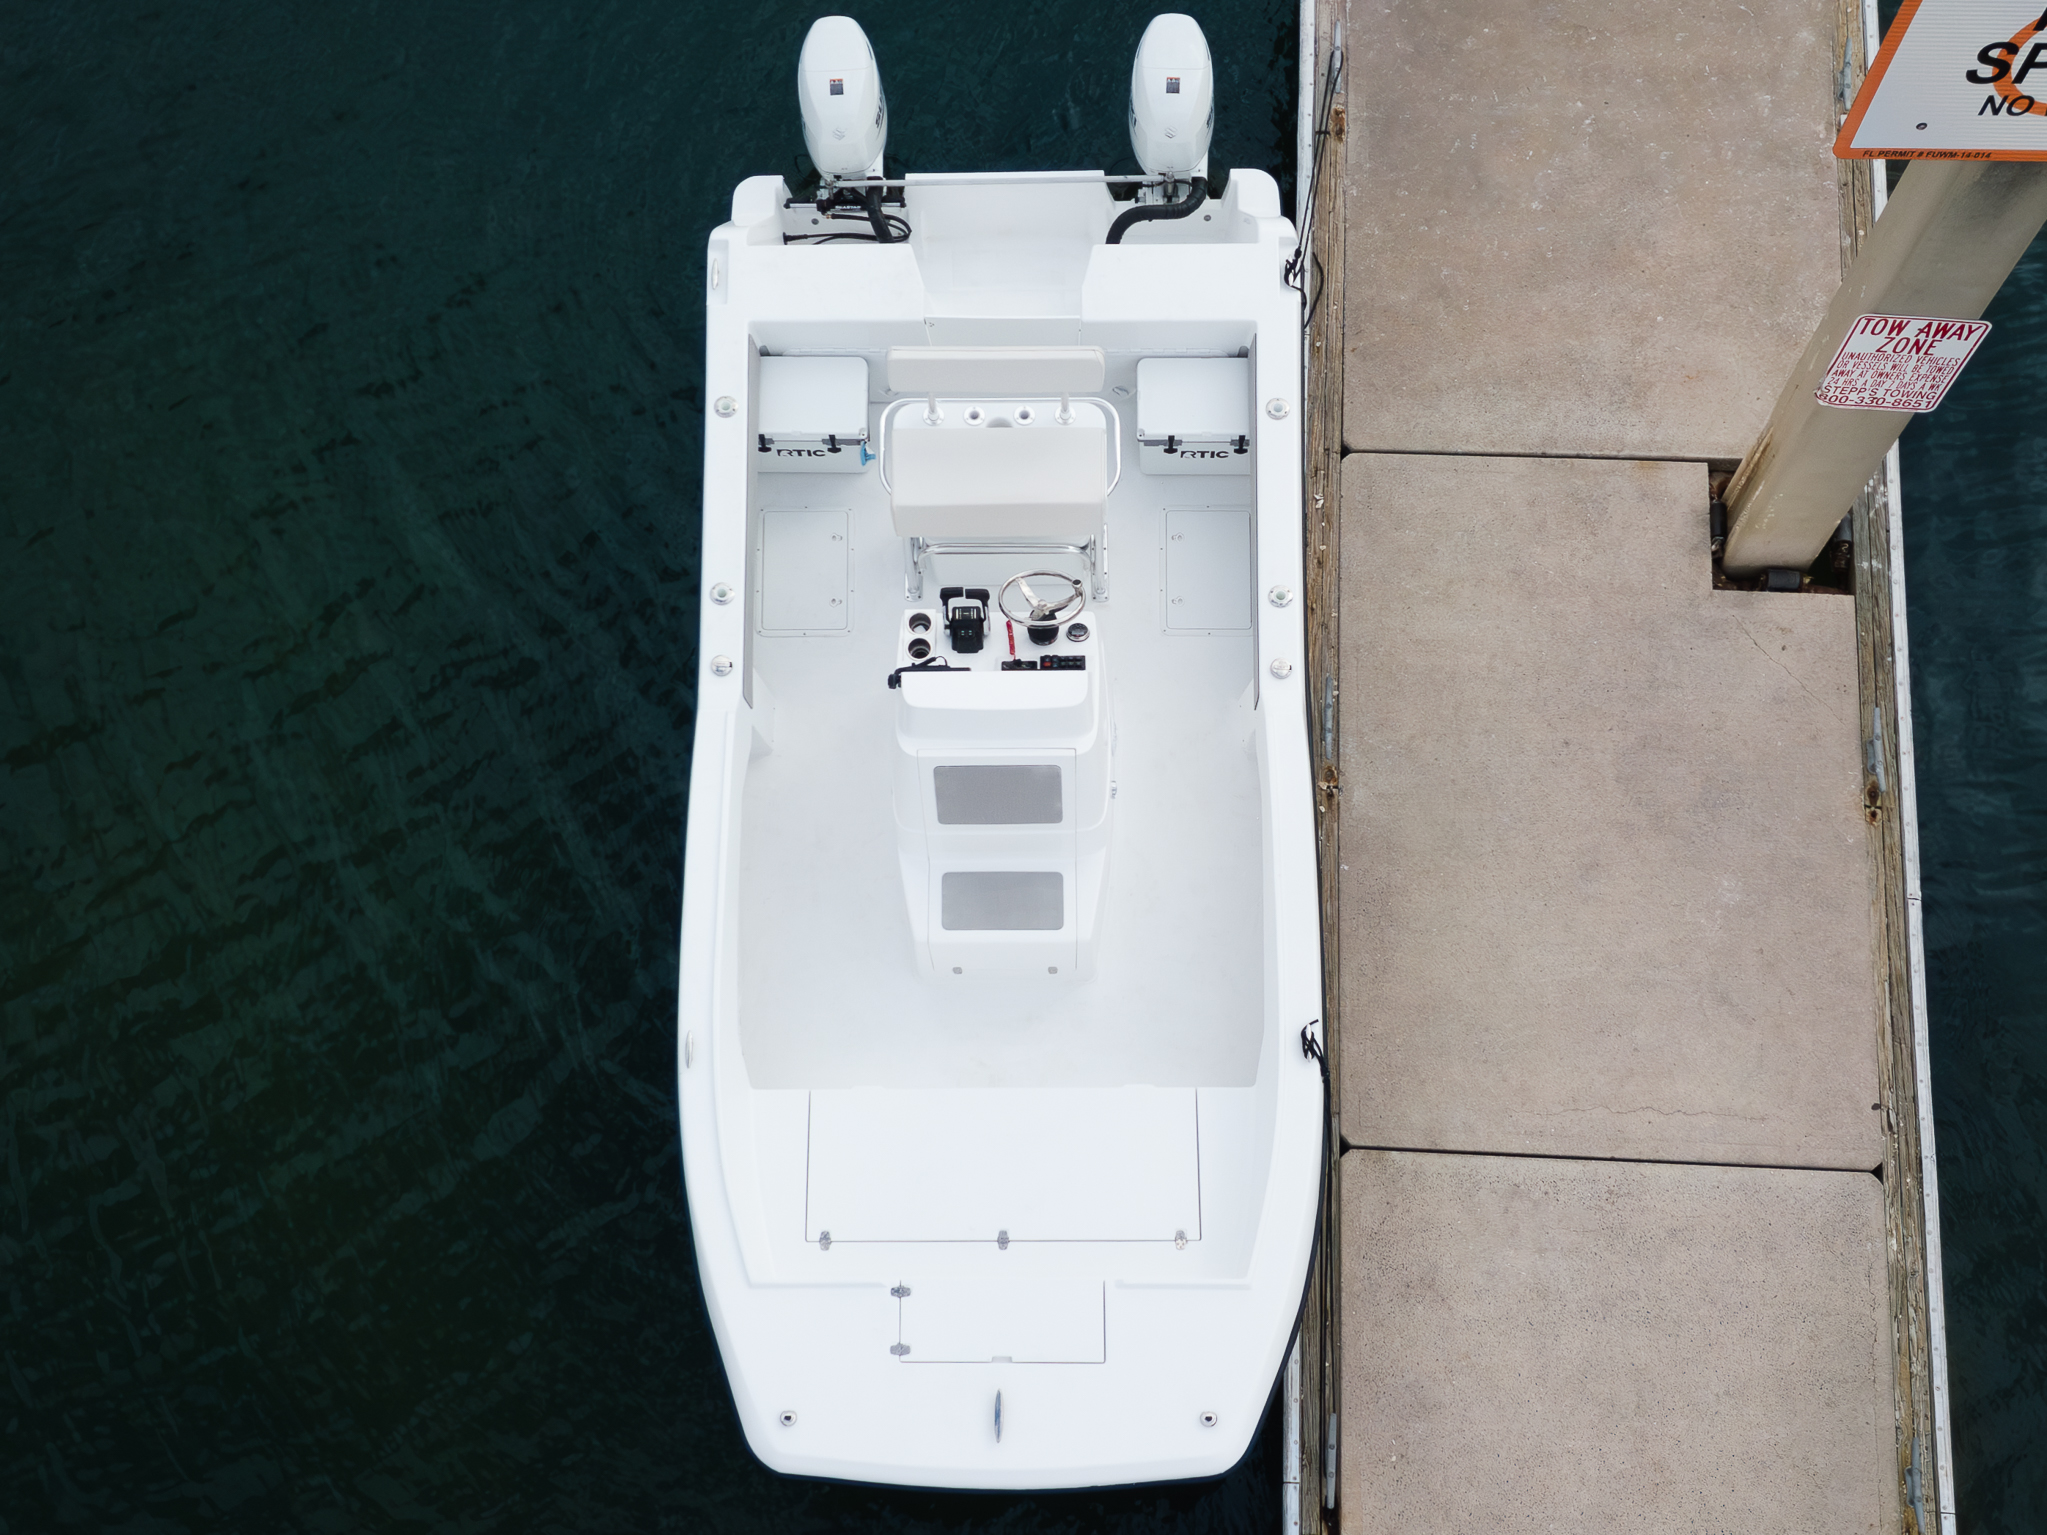 ArrowCat 20' center console powercat boat on the water in clearwater, Florida